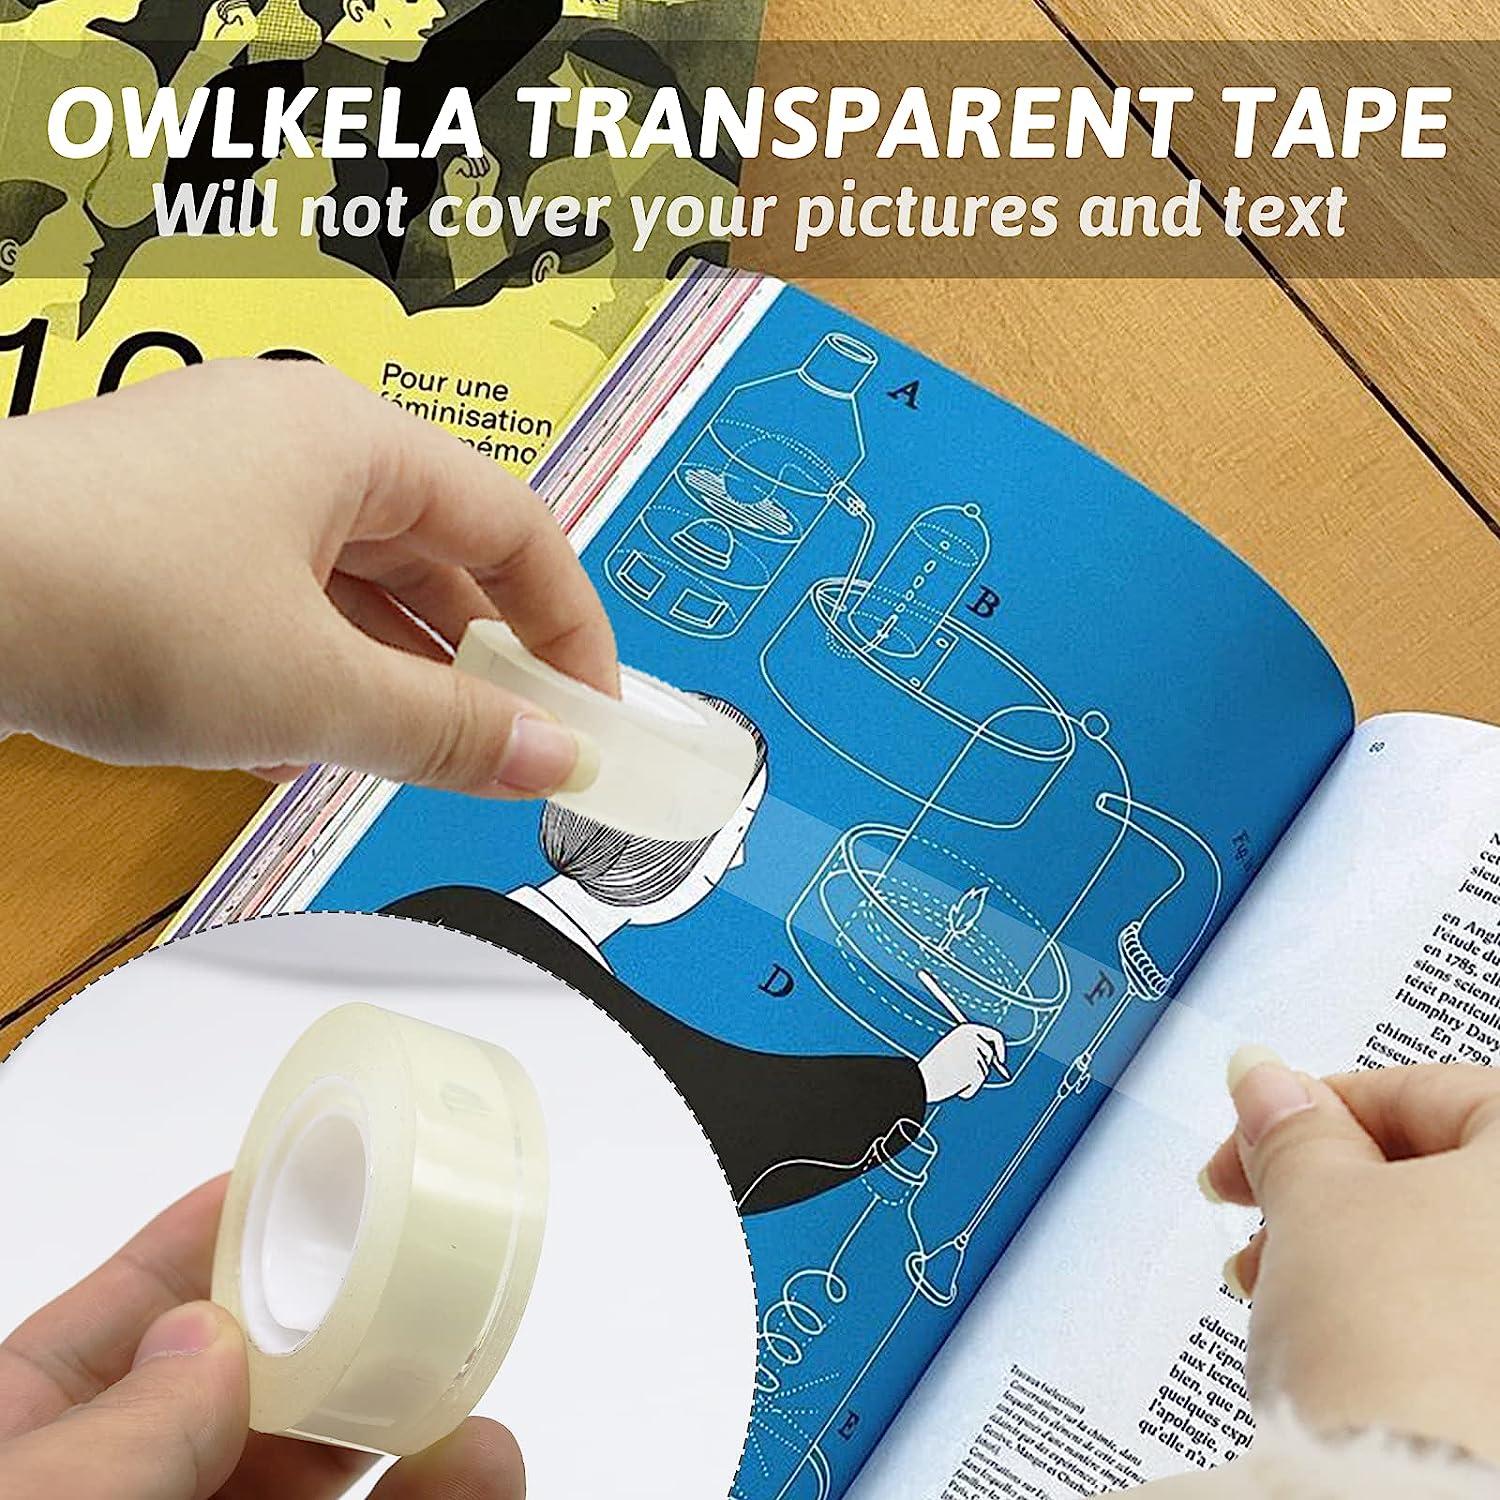 OWLKELA 6 Rolls Transparent Tape Refills Clear Tape All-Purpose Transparent Glossy Tape for Office Home School